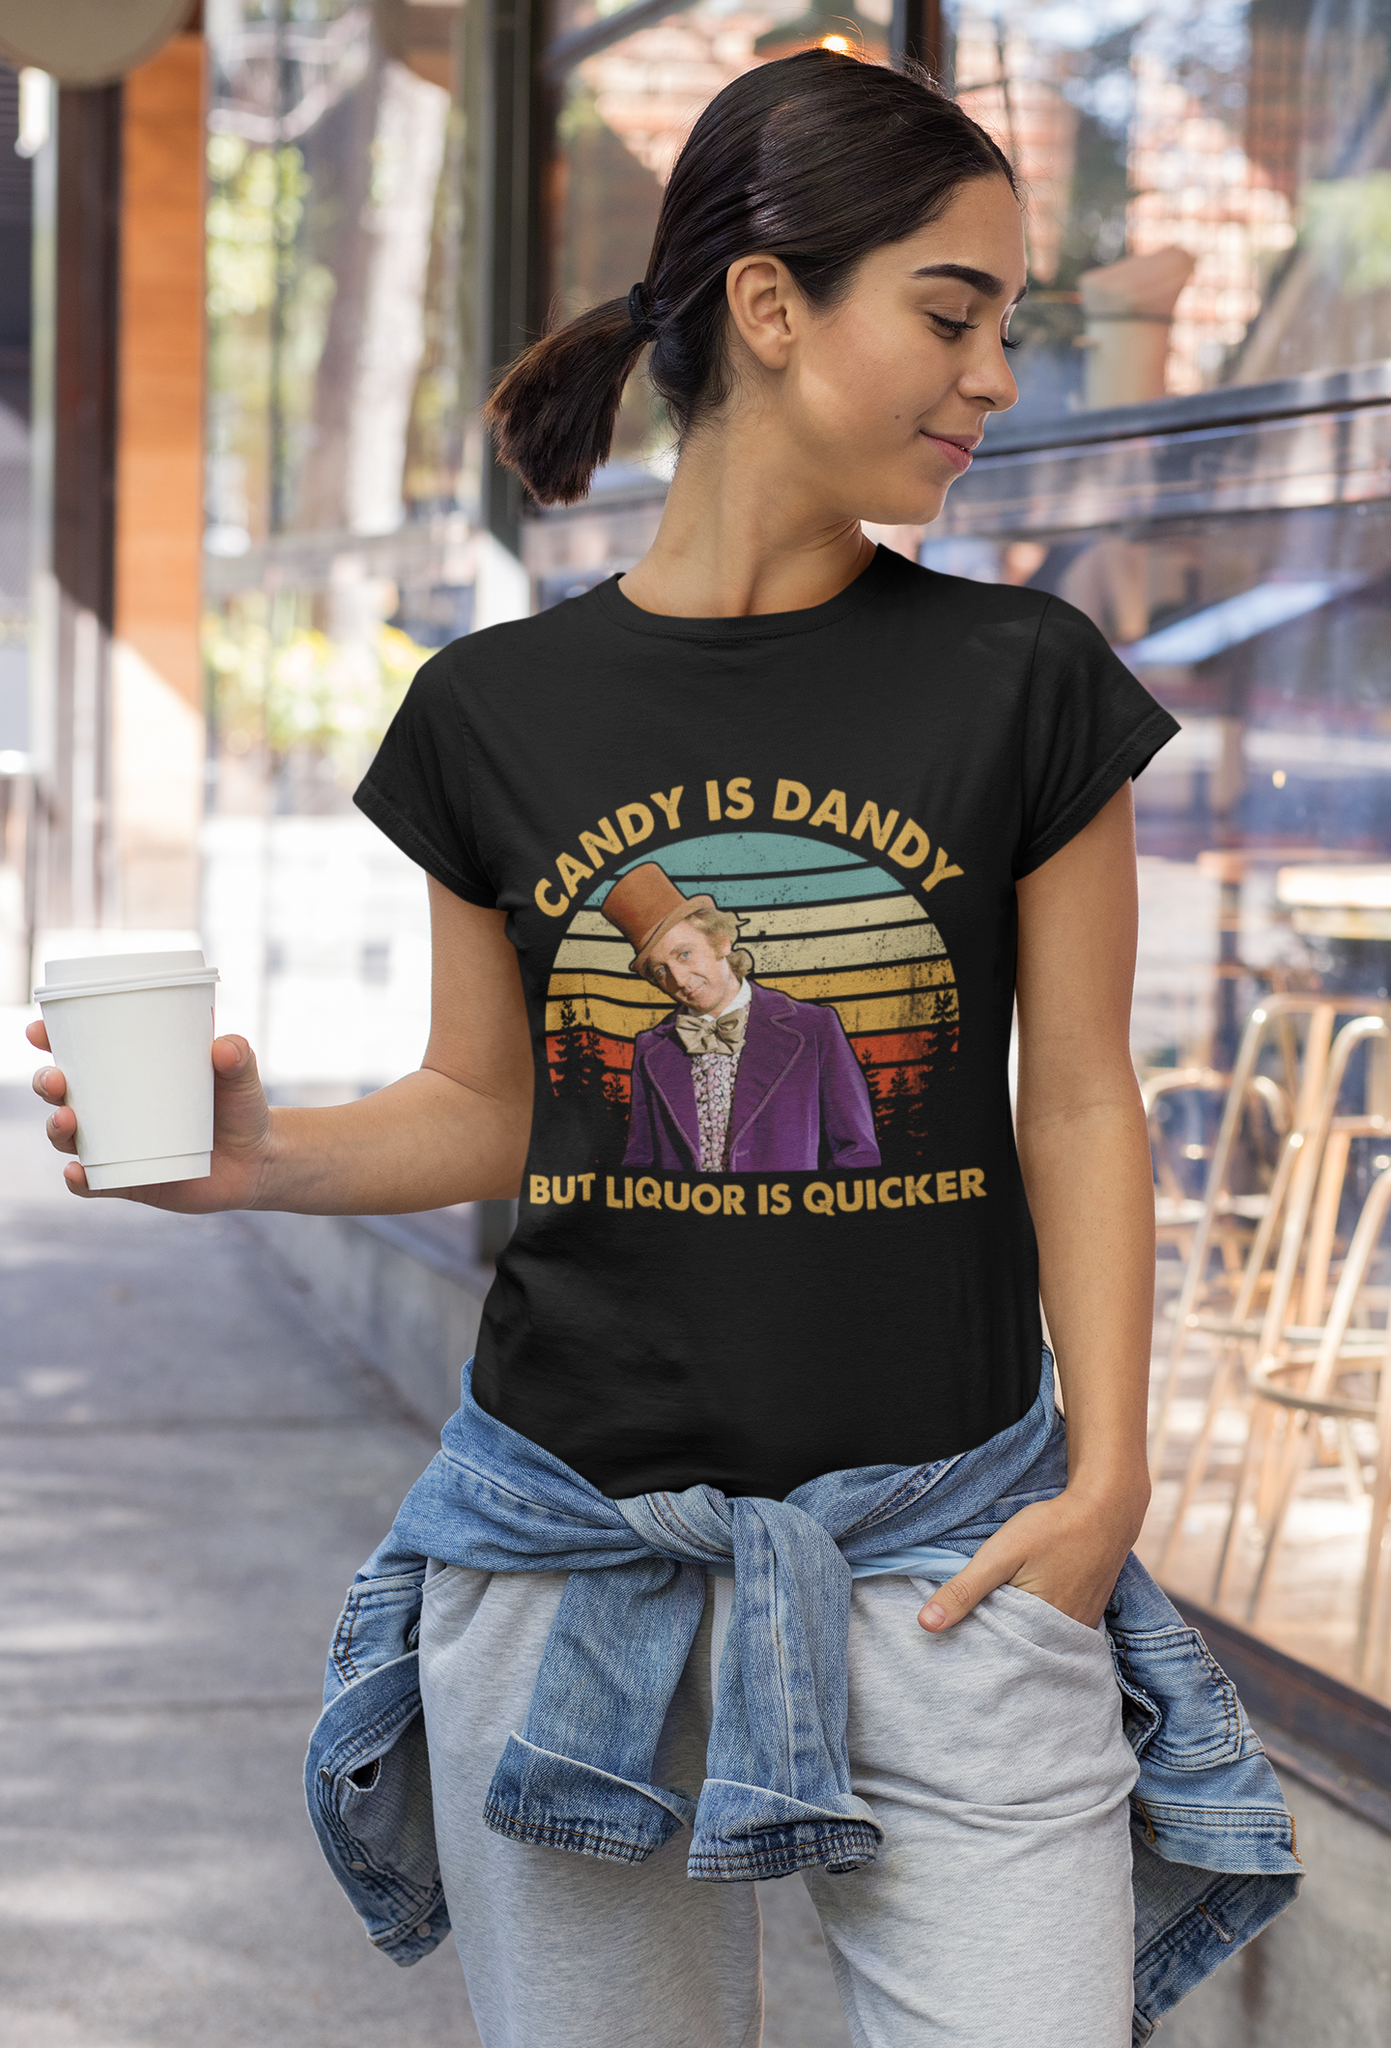 Charlie And The Chocolate Factory Vintage T Shirt, Candy Is Dandy But Liquor Is Quicker Tshirt, Willy Wonka T Shirt